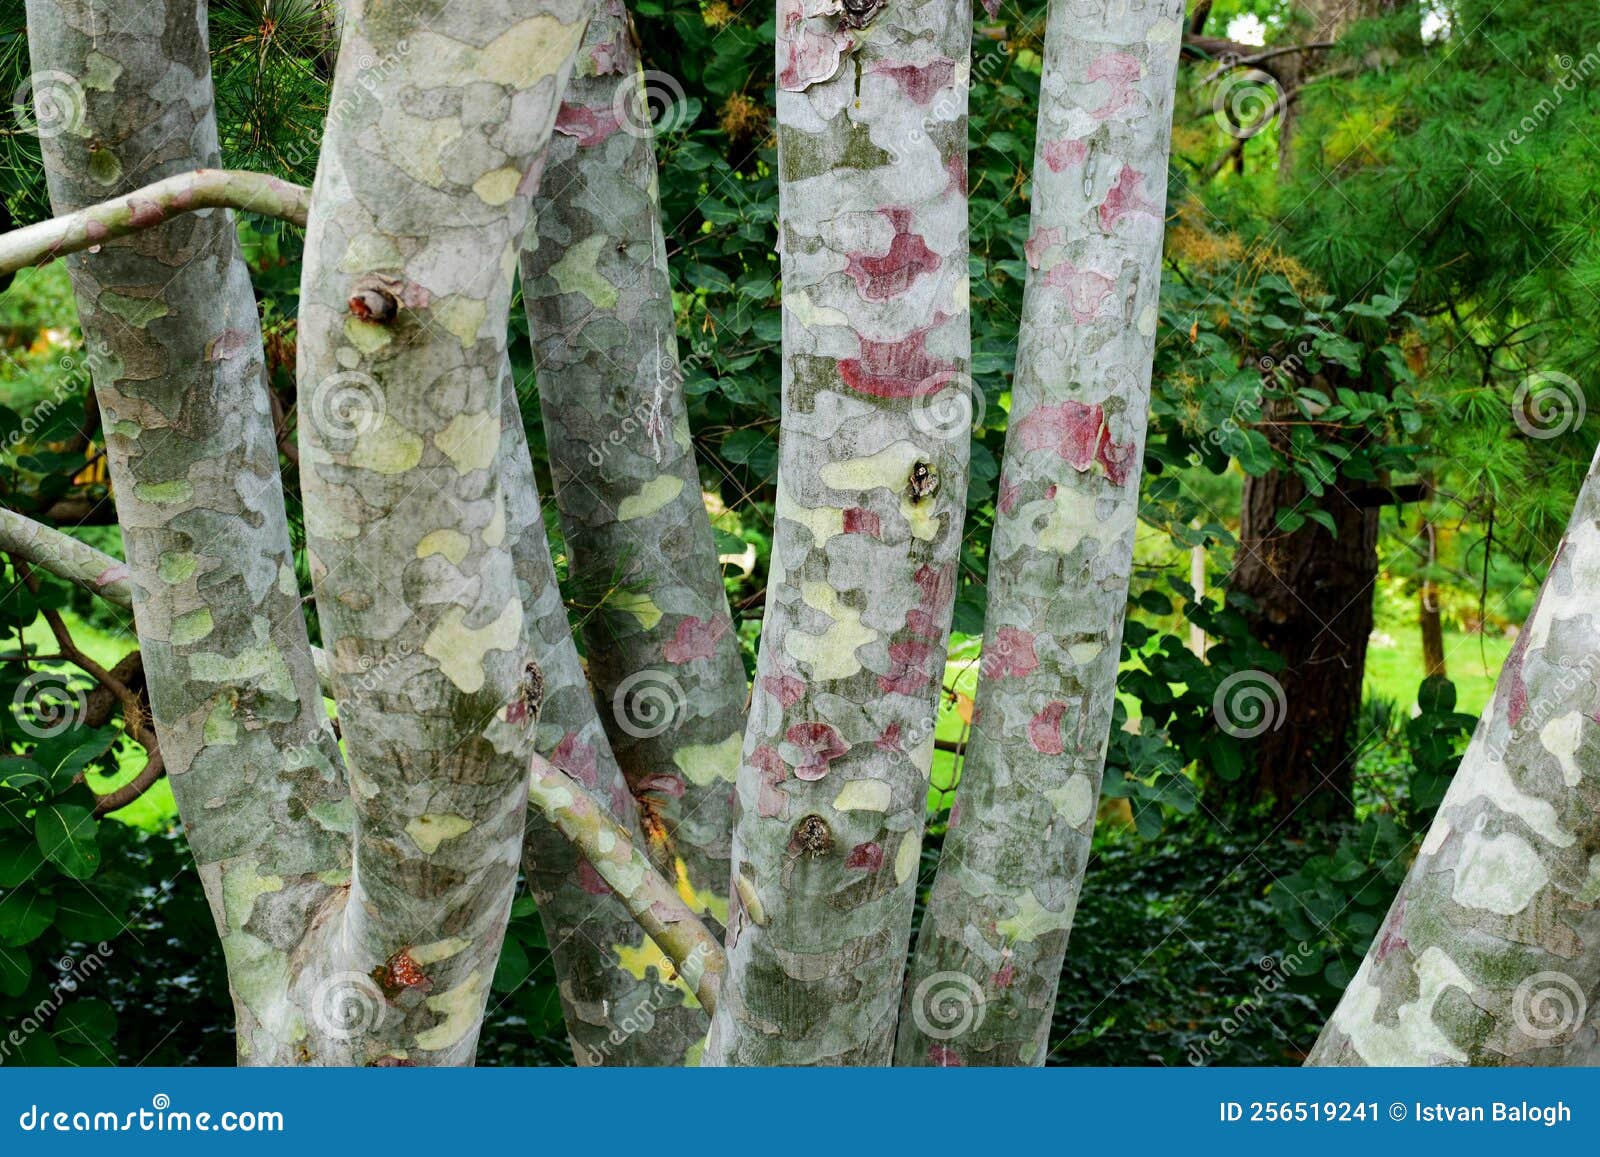 lacebark pine with multiple trunks. closeup view. lush green background